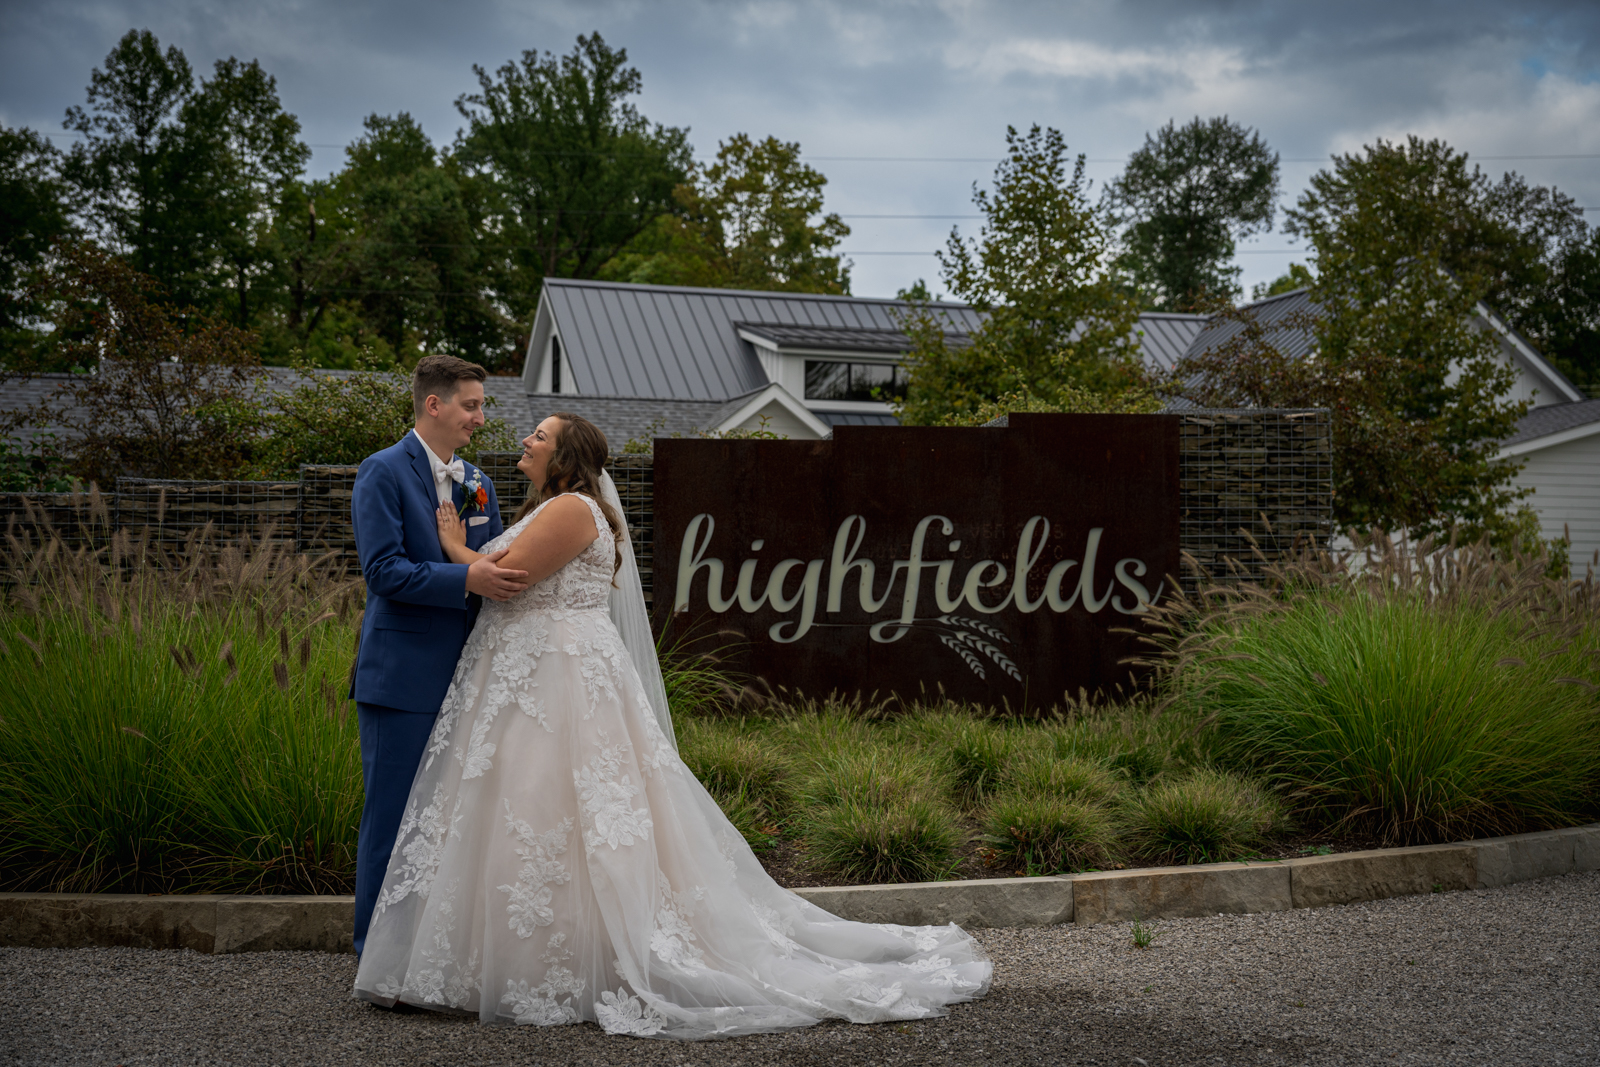 A Fairytale Wedding at Highfields Event Center: Eric and Samantha’s Love Story